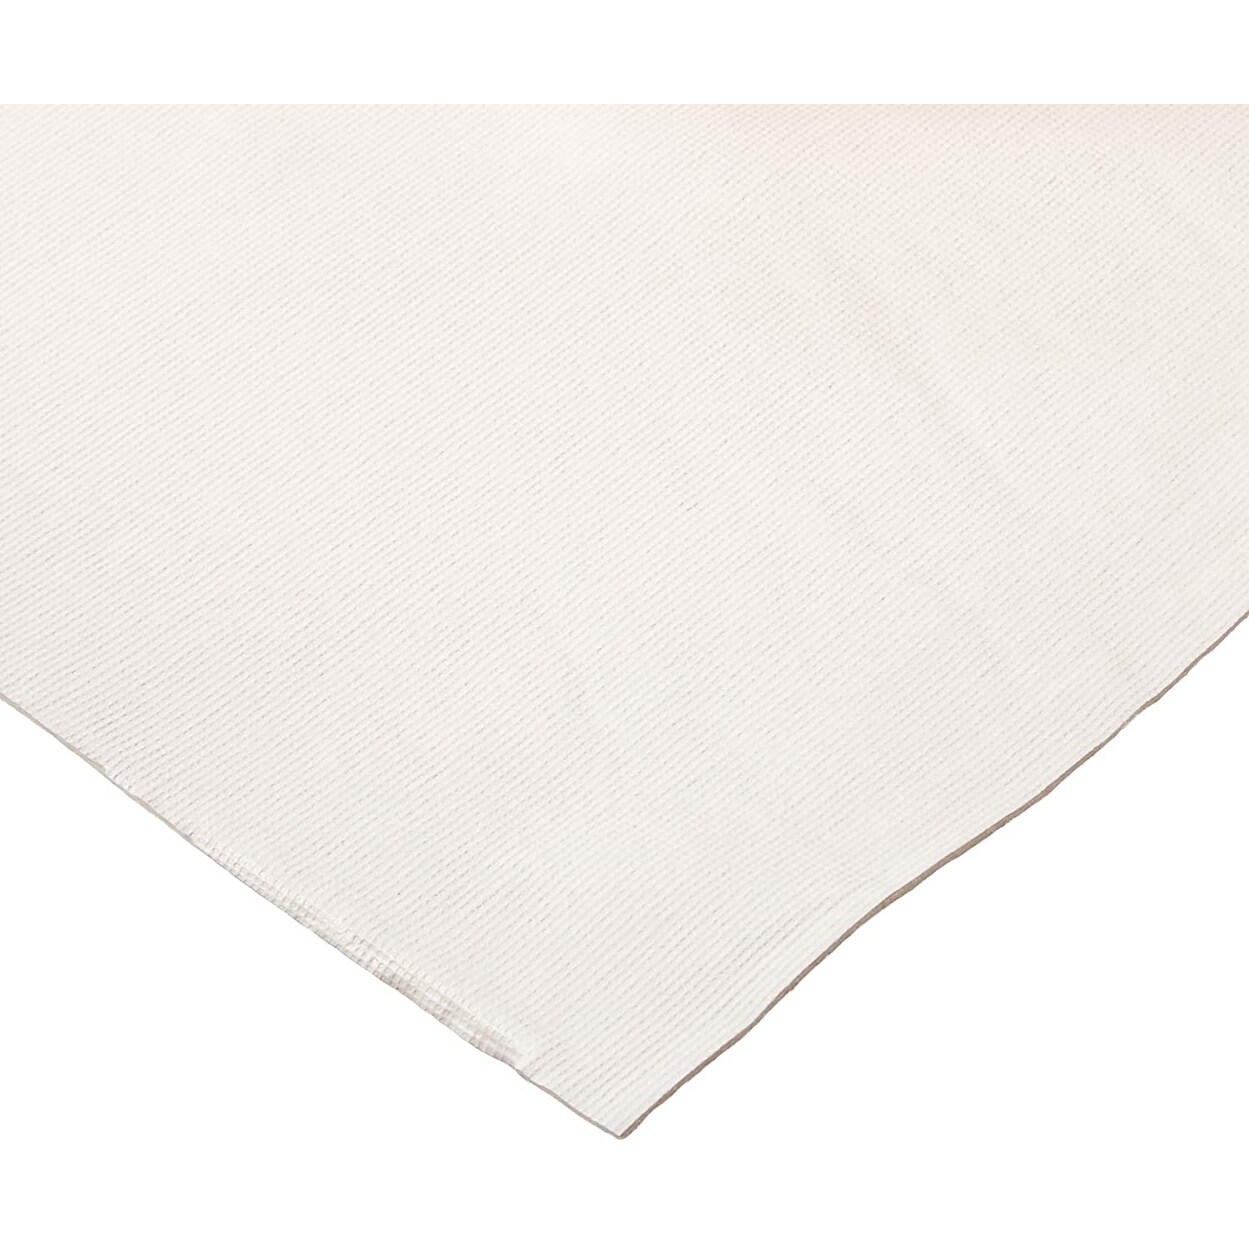 Cushioned Table Protector Pad - 52x120 - On Sale - Bed Bath & Beyond -  35473967